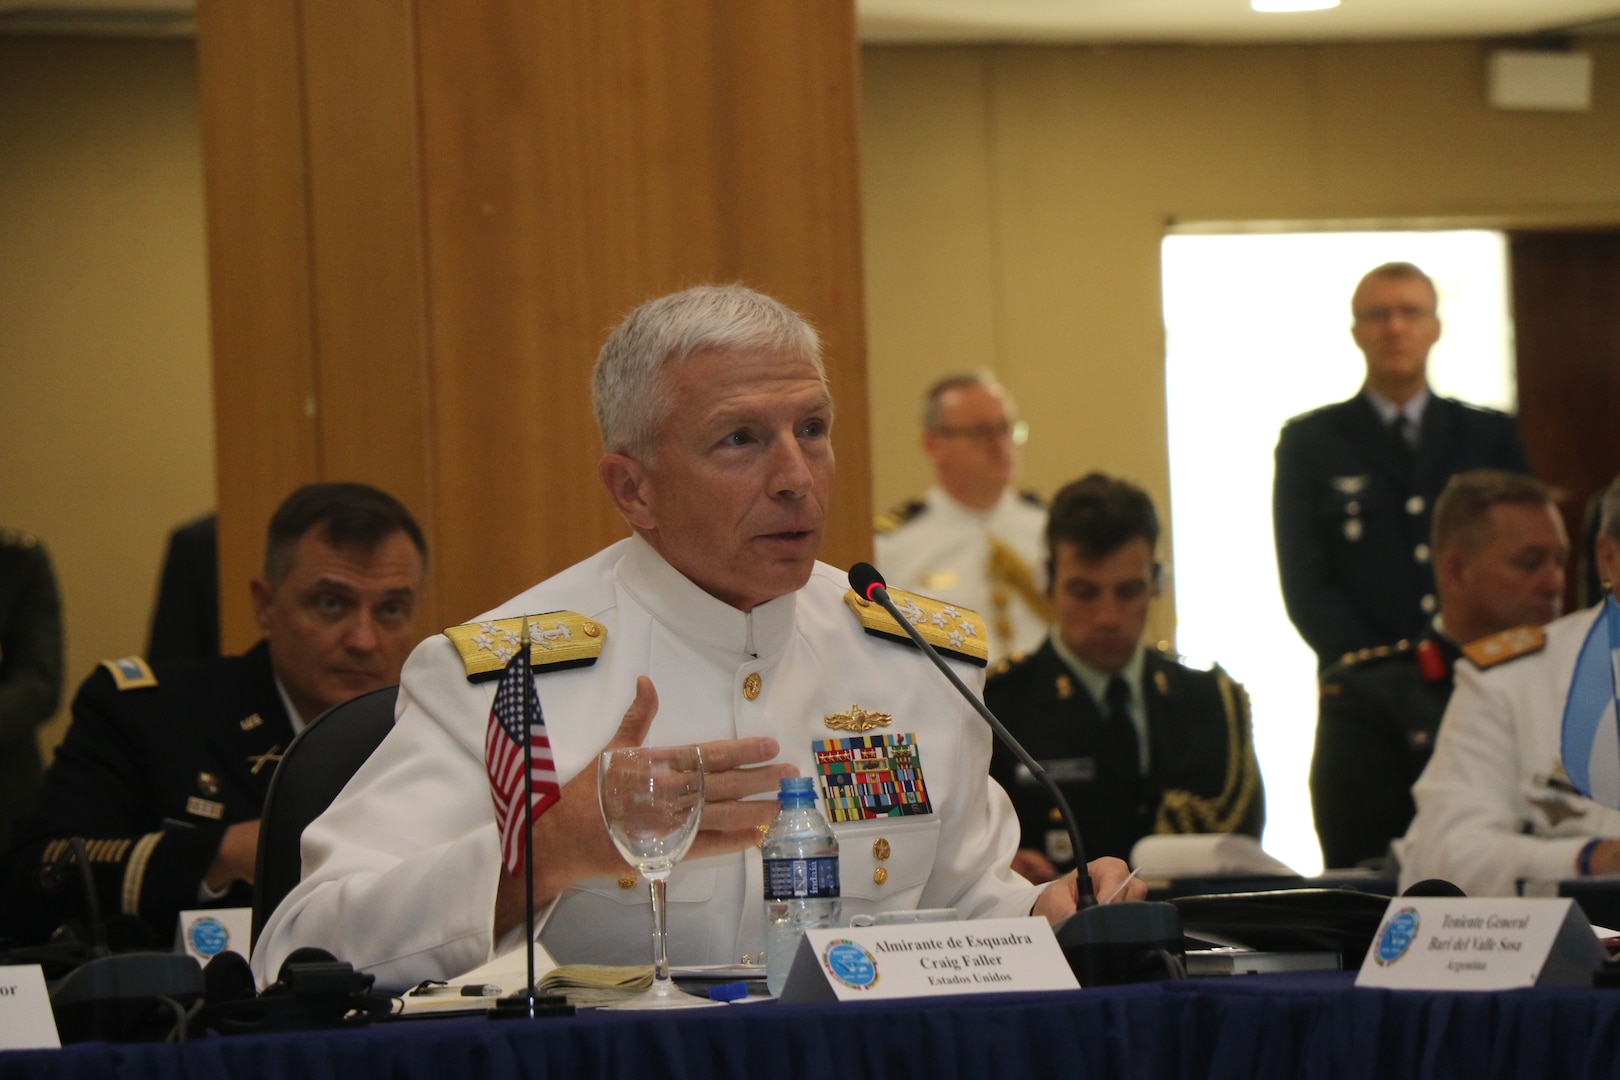 Military leaders speak at a conference.